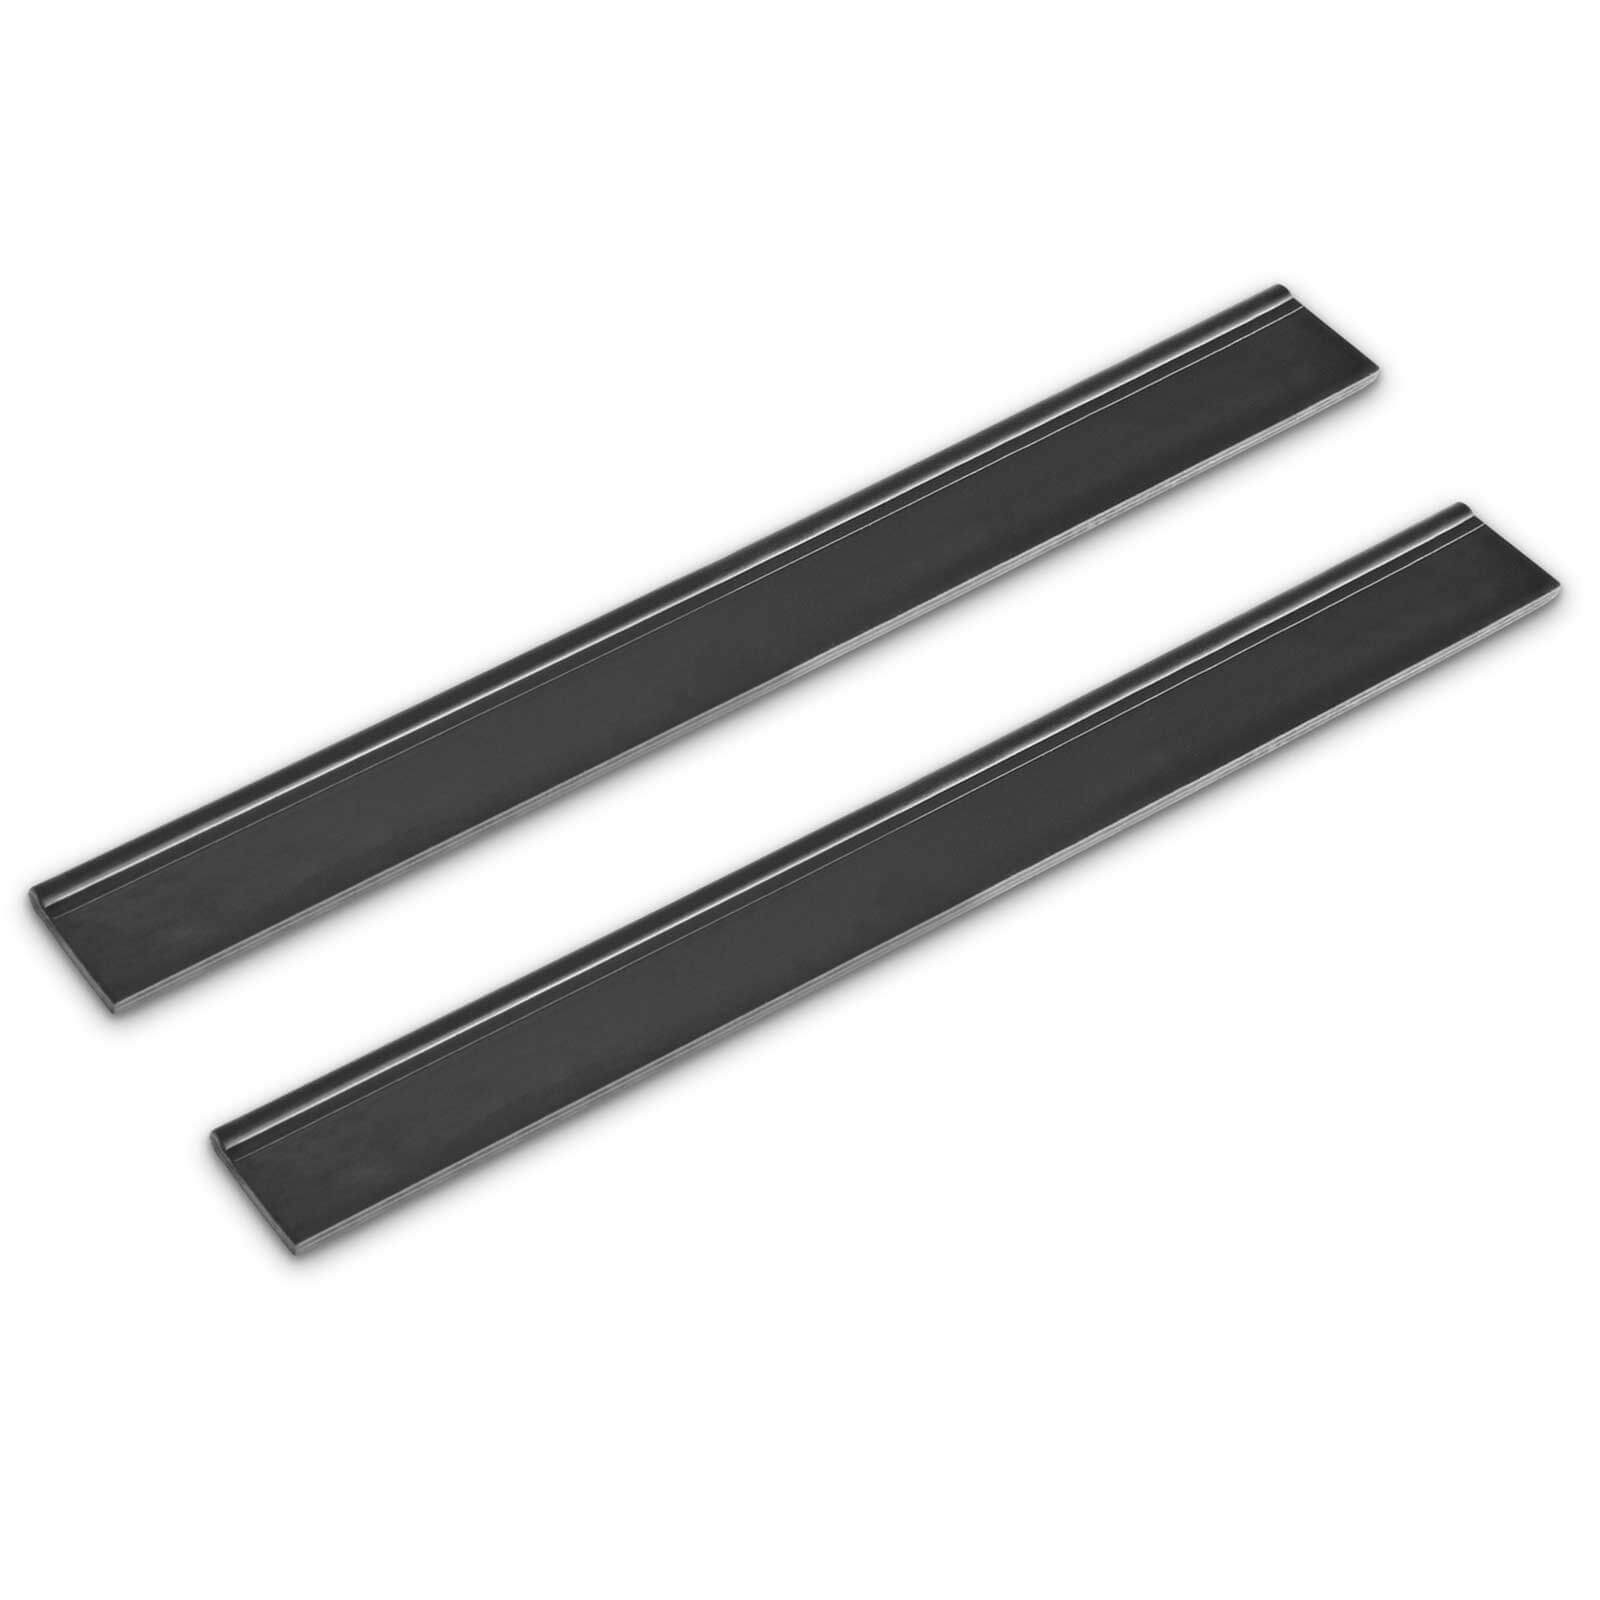 Karcher Suction Lips 170mm for WV 2 - 5 Window Vacs Pack of 2